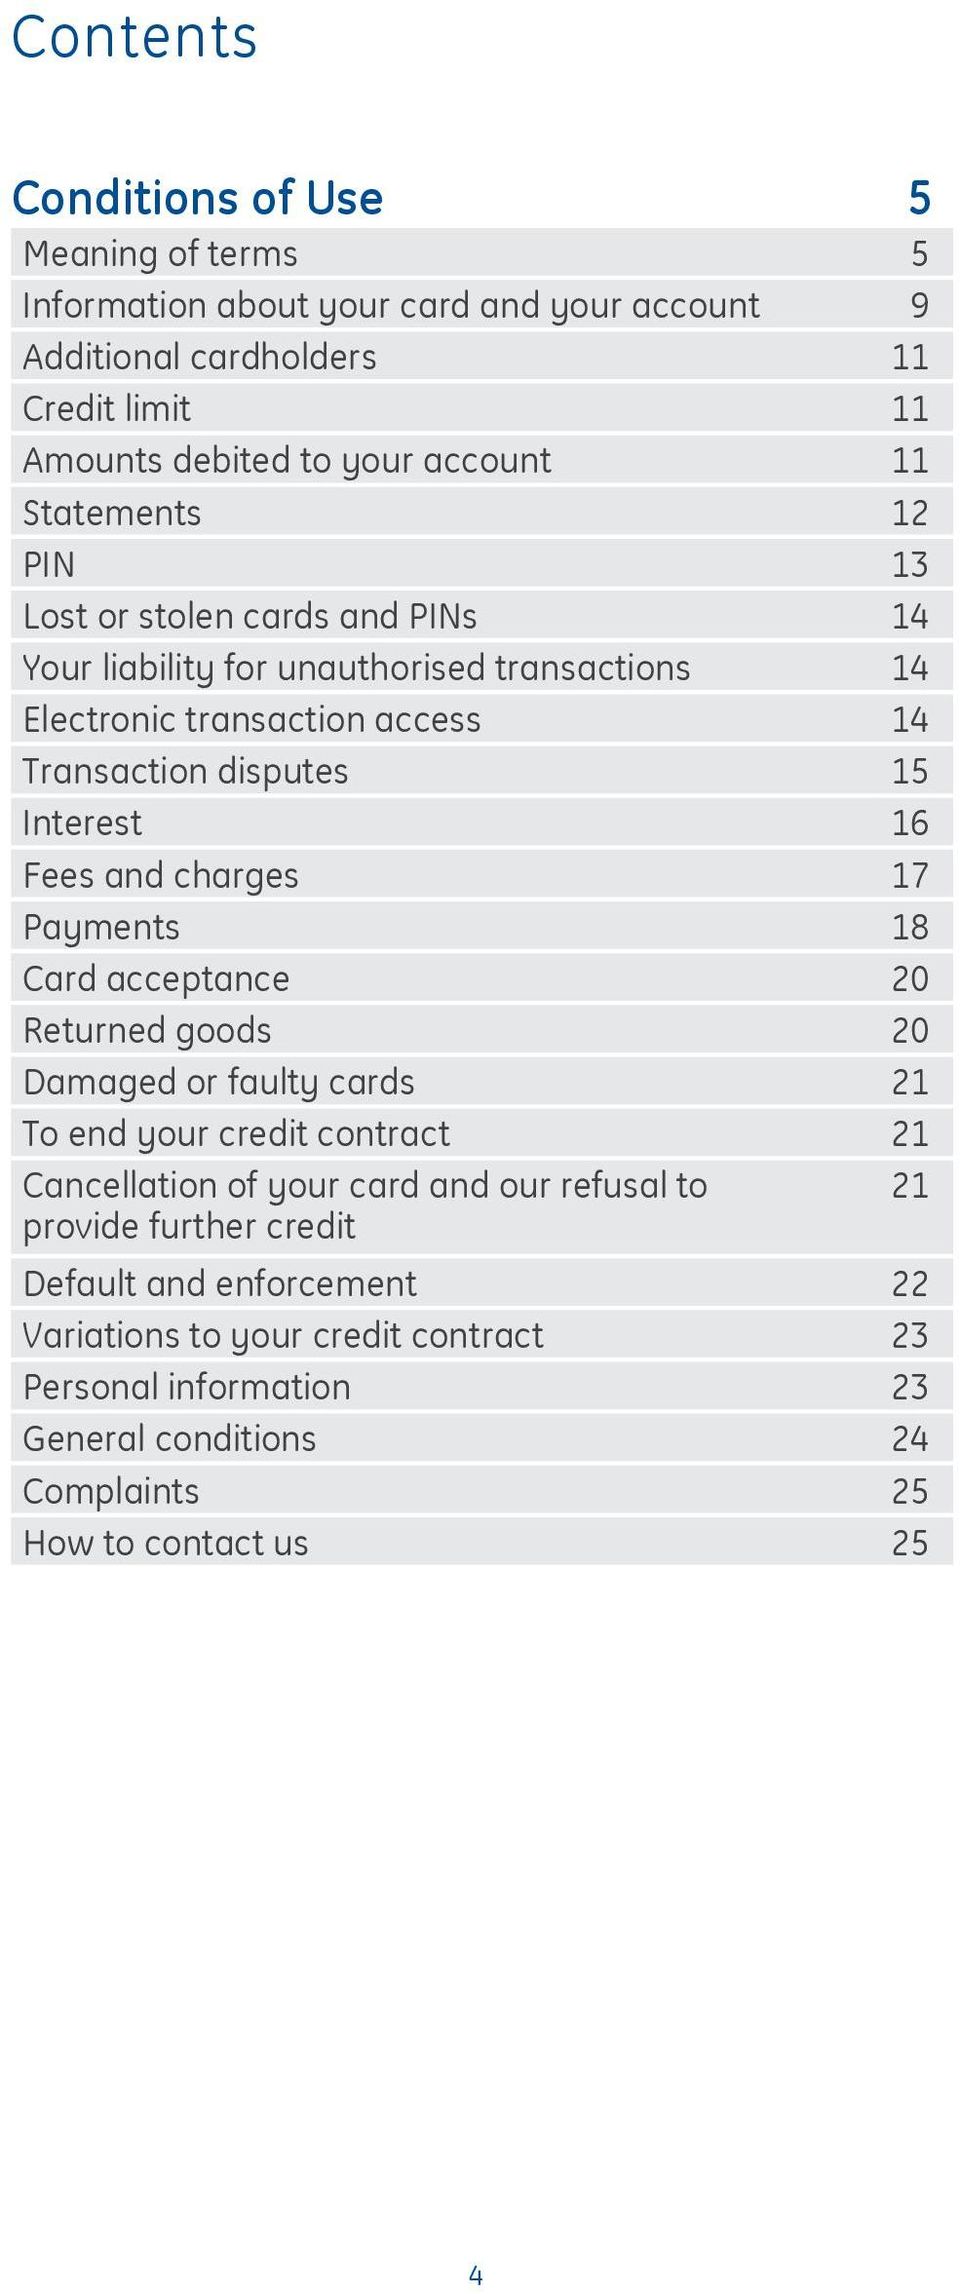 Fees and charges 17 Payments 18 Card acceptance 20 Returned goods 20 Damaged or faulty cards 21 To end your credit contract 21 Cancellation of your card and our refusal to